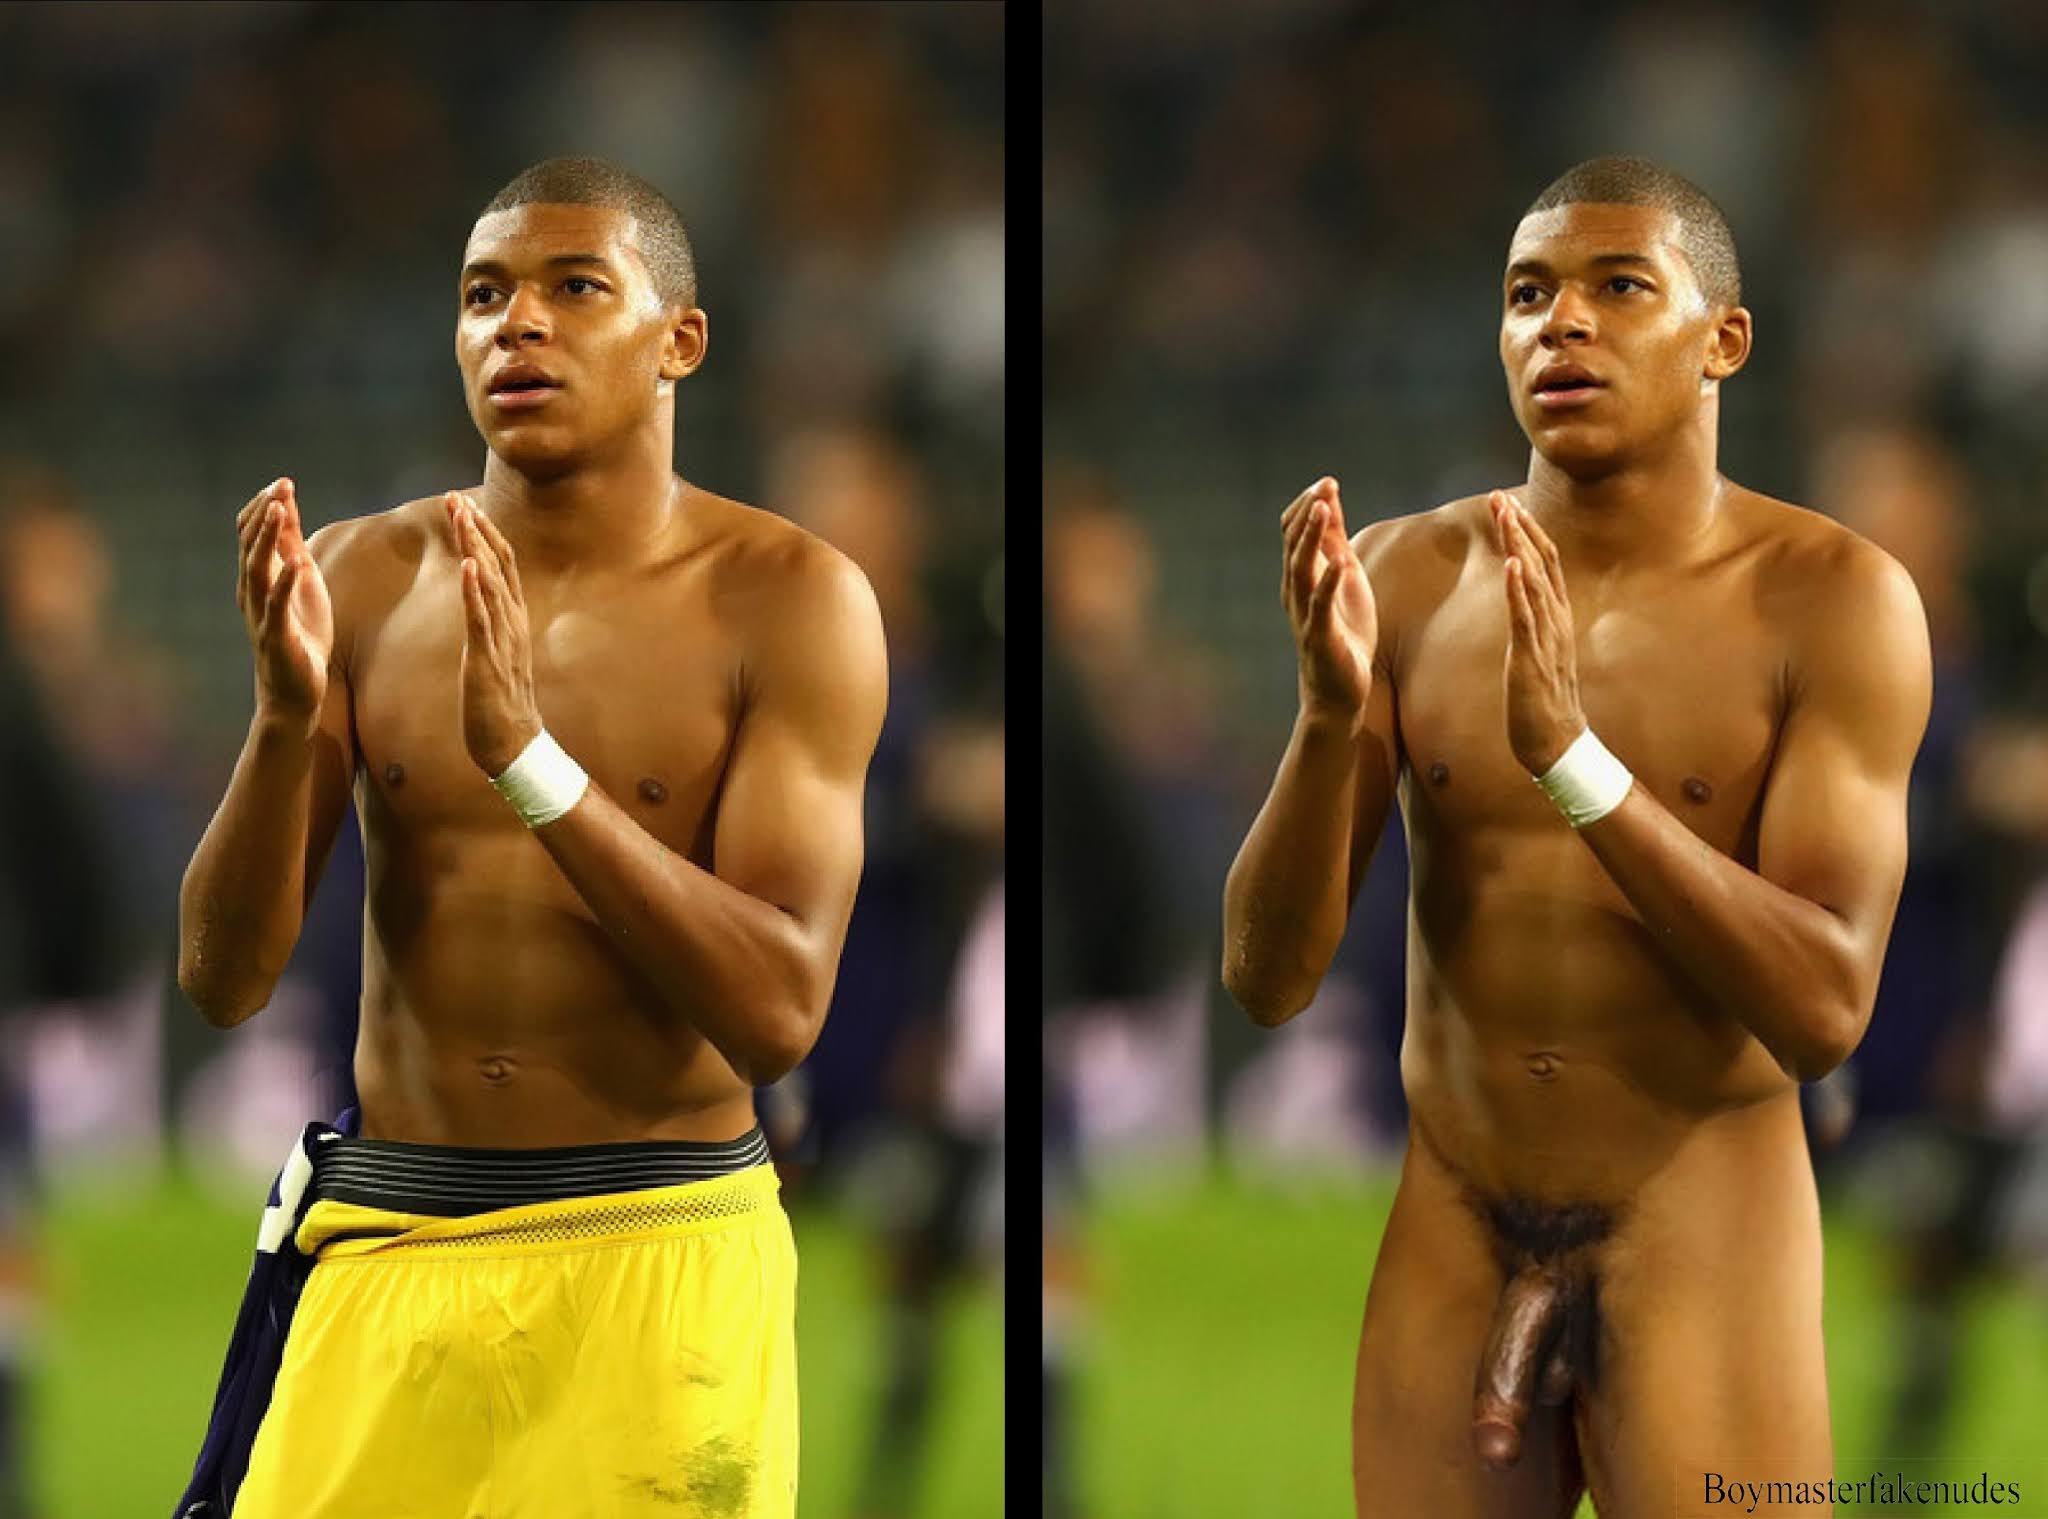 Kylian Mbappé and Neymar: The Ultimate Erotic Gallery Collection for Adult Fans